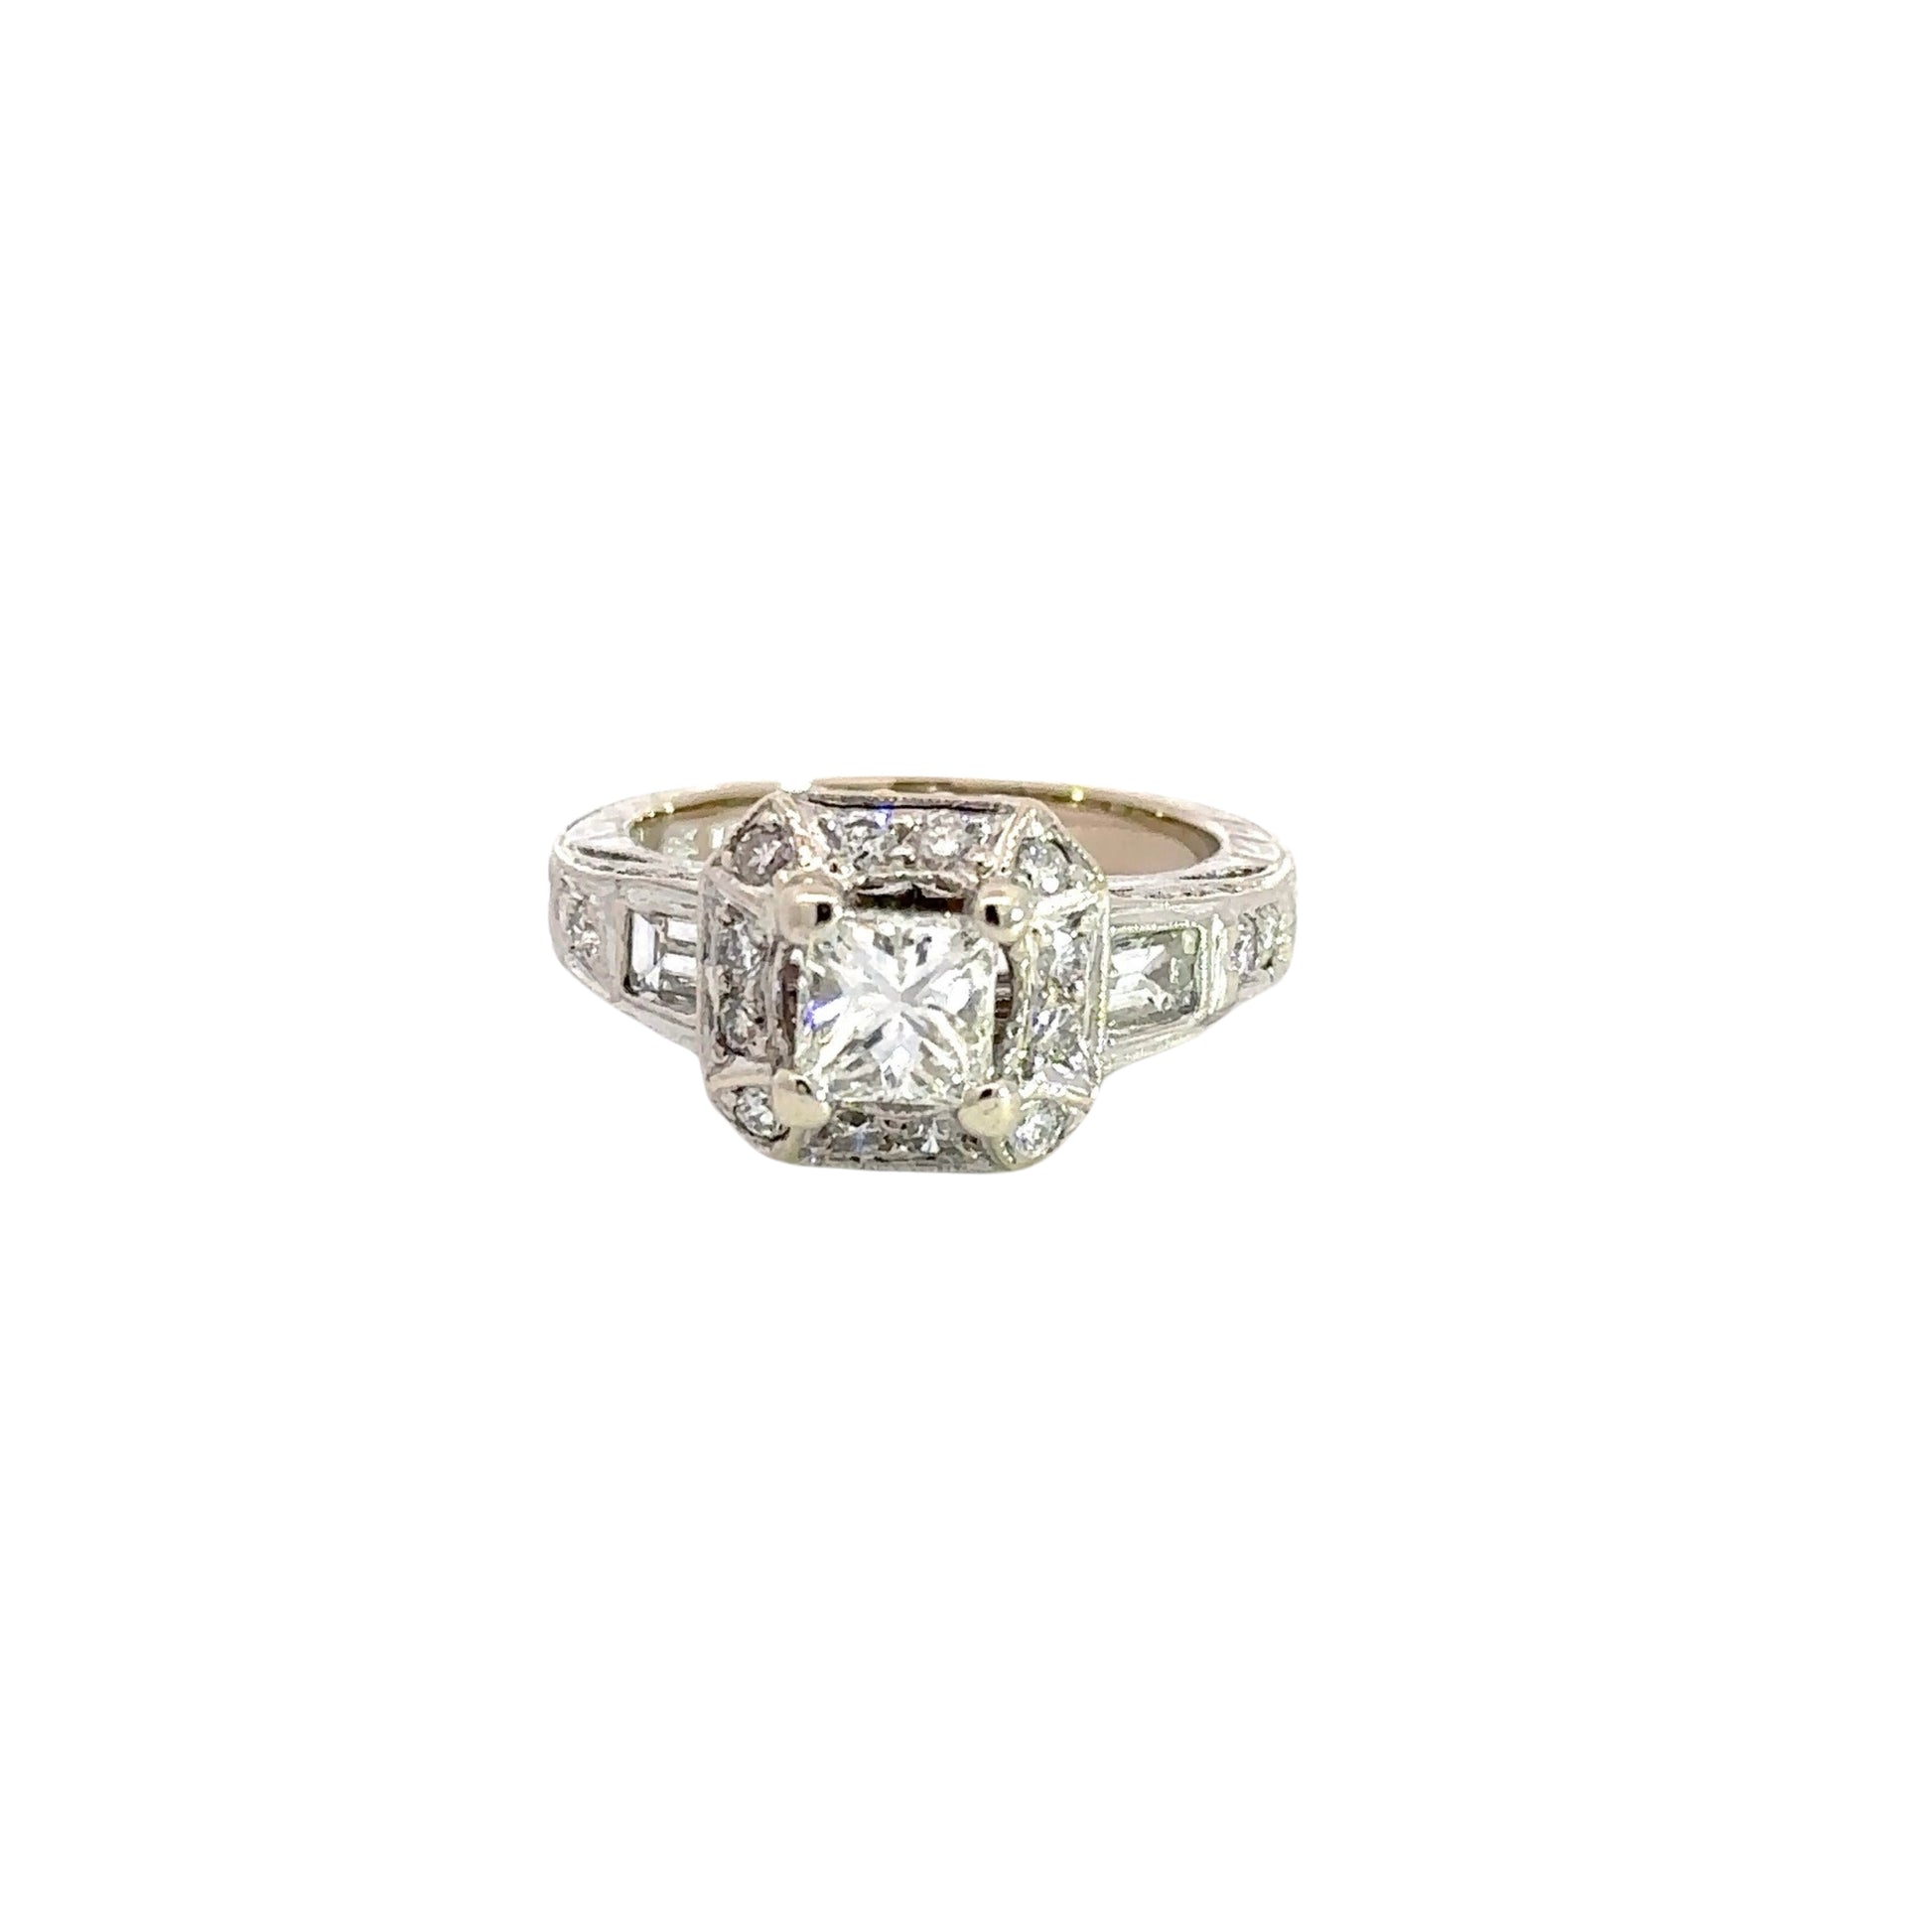 Front of ring with .50 carat princess-cut diamond and 12 small diamonds around the center-stone